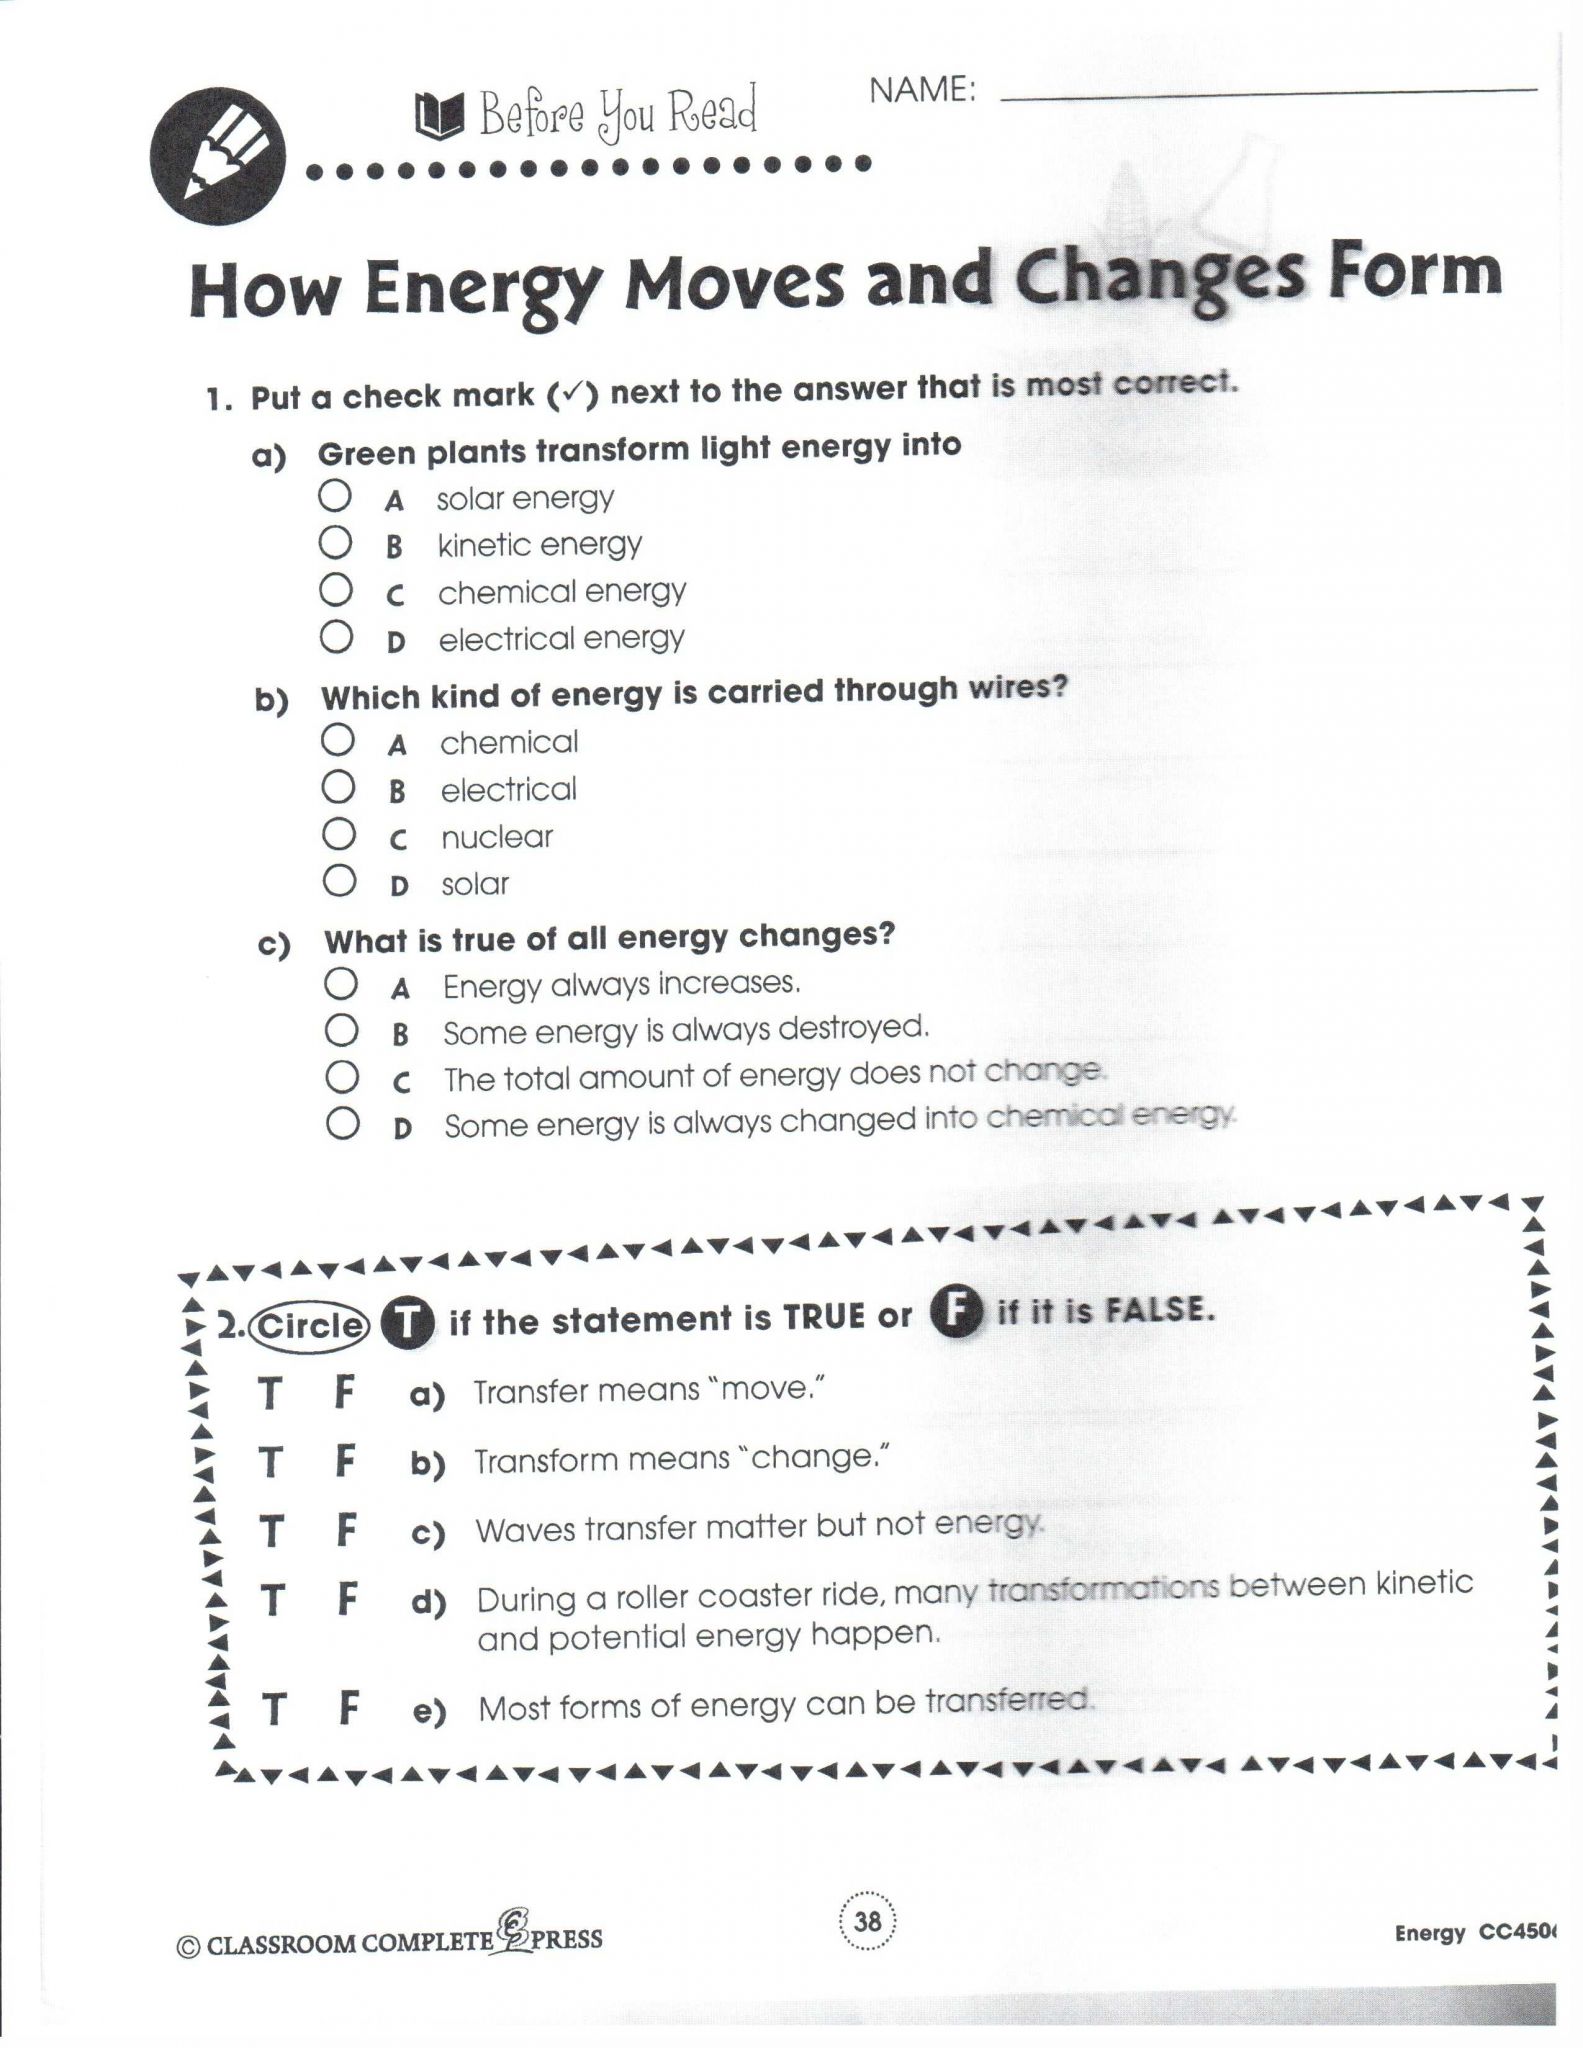 Physical Science Worksheet Conservation Of Energy 2 Answer Key as Well as Energy Transformations and Conservation Worksheet Answers